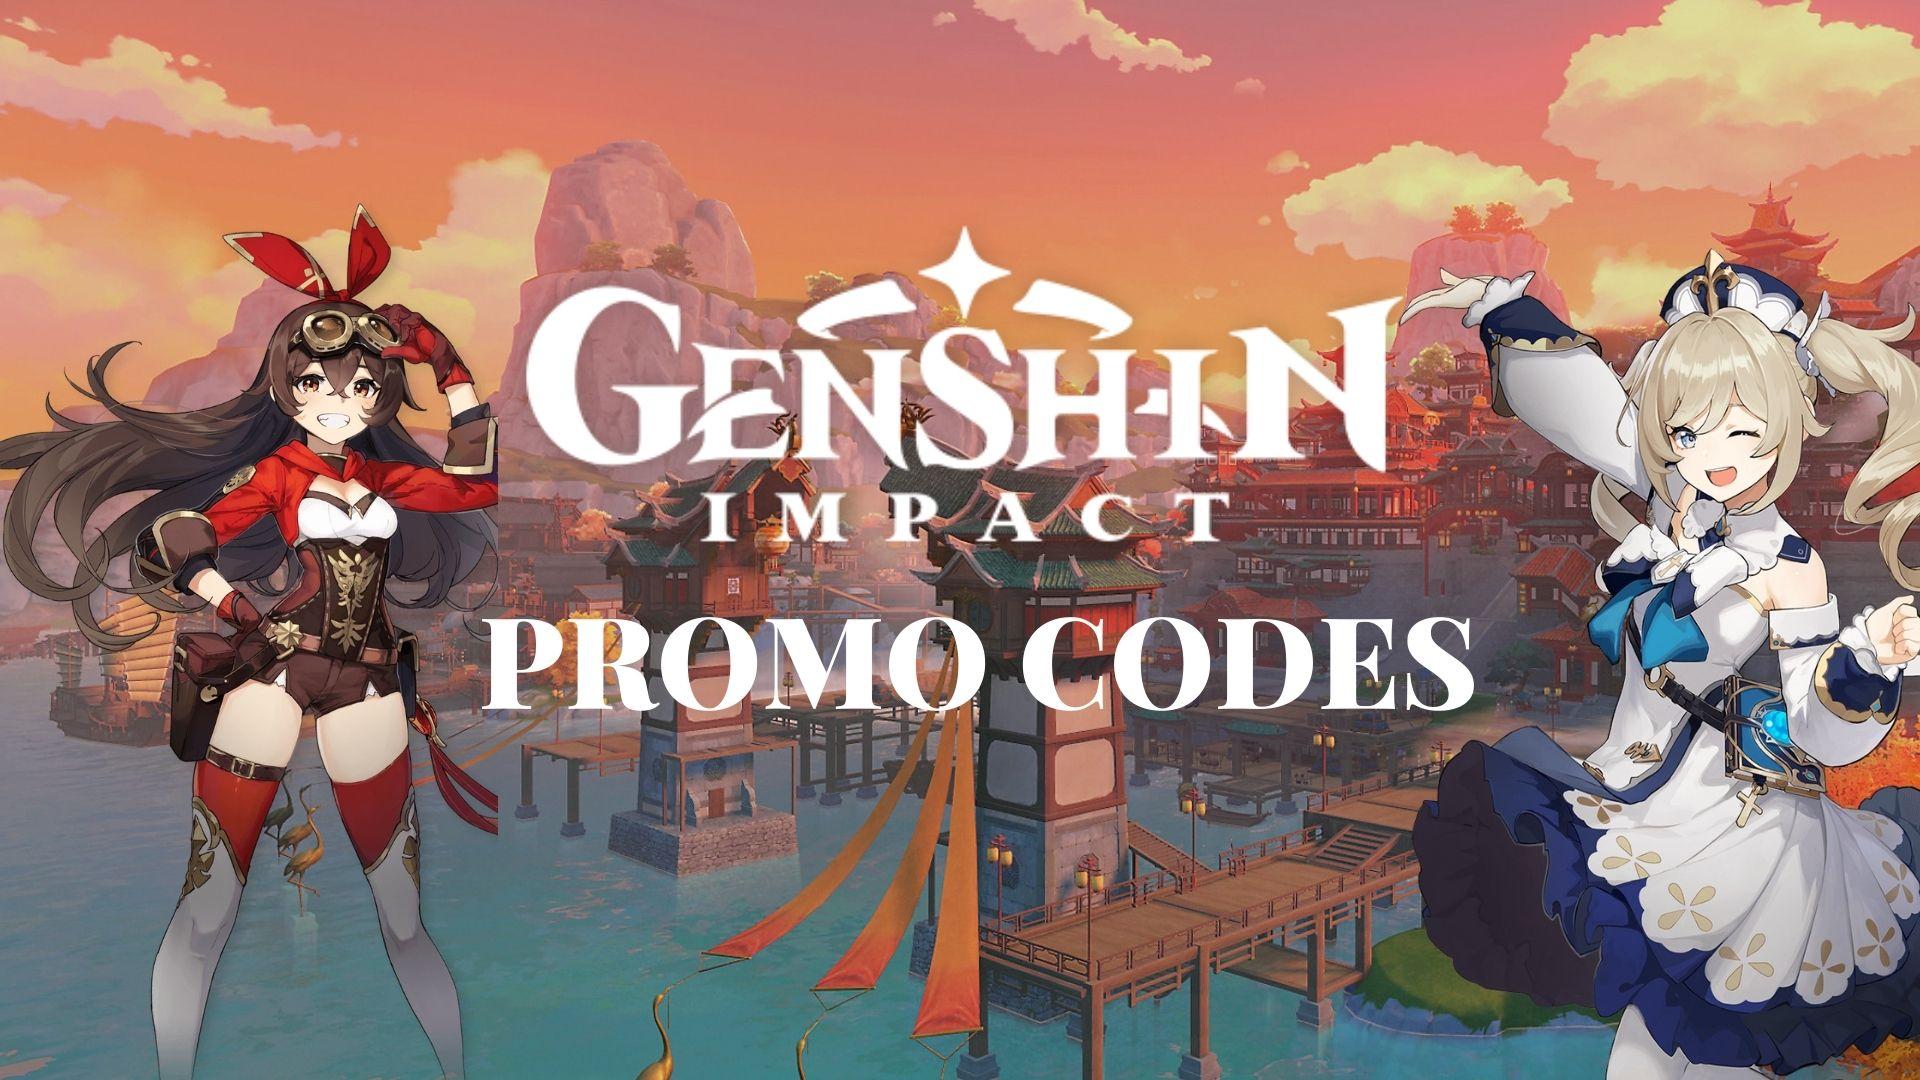 An image of Amber and Barbara with the words Genshin Impact promo codes